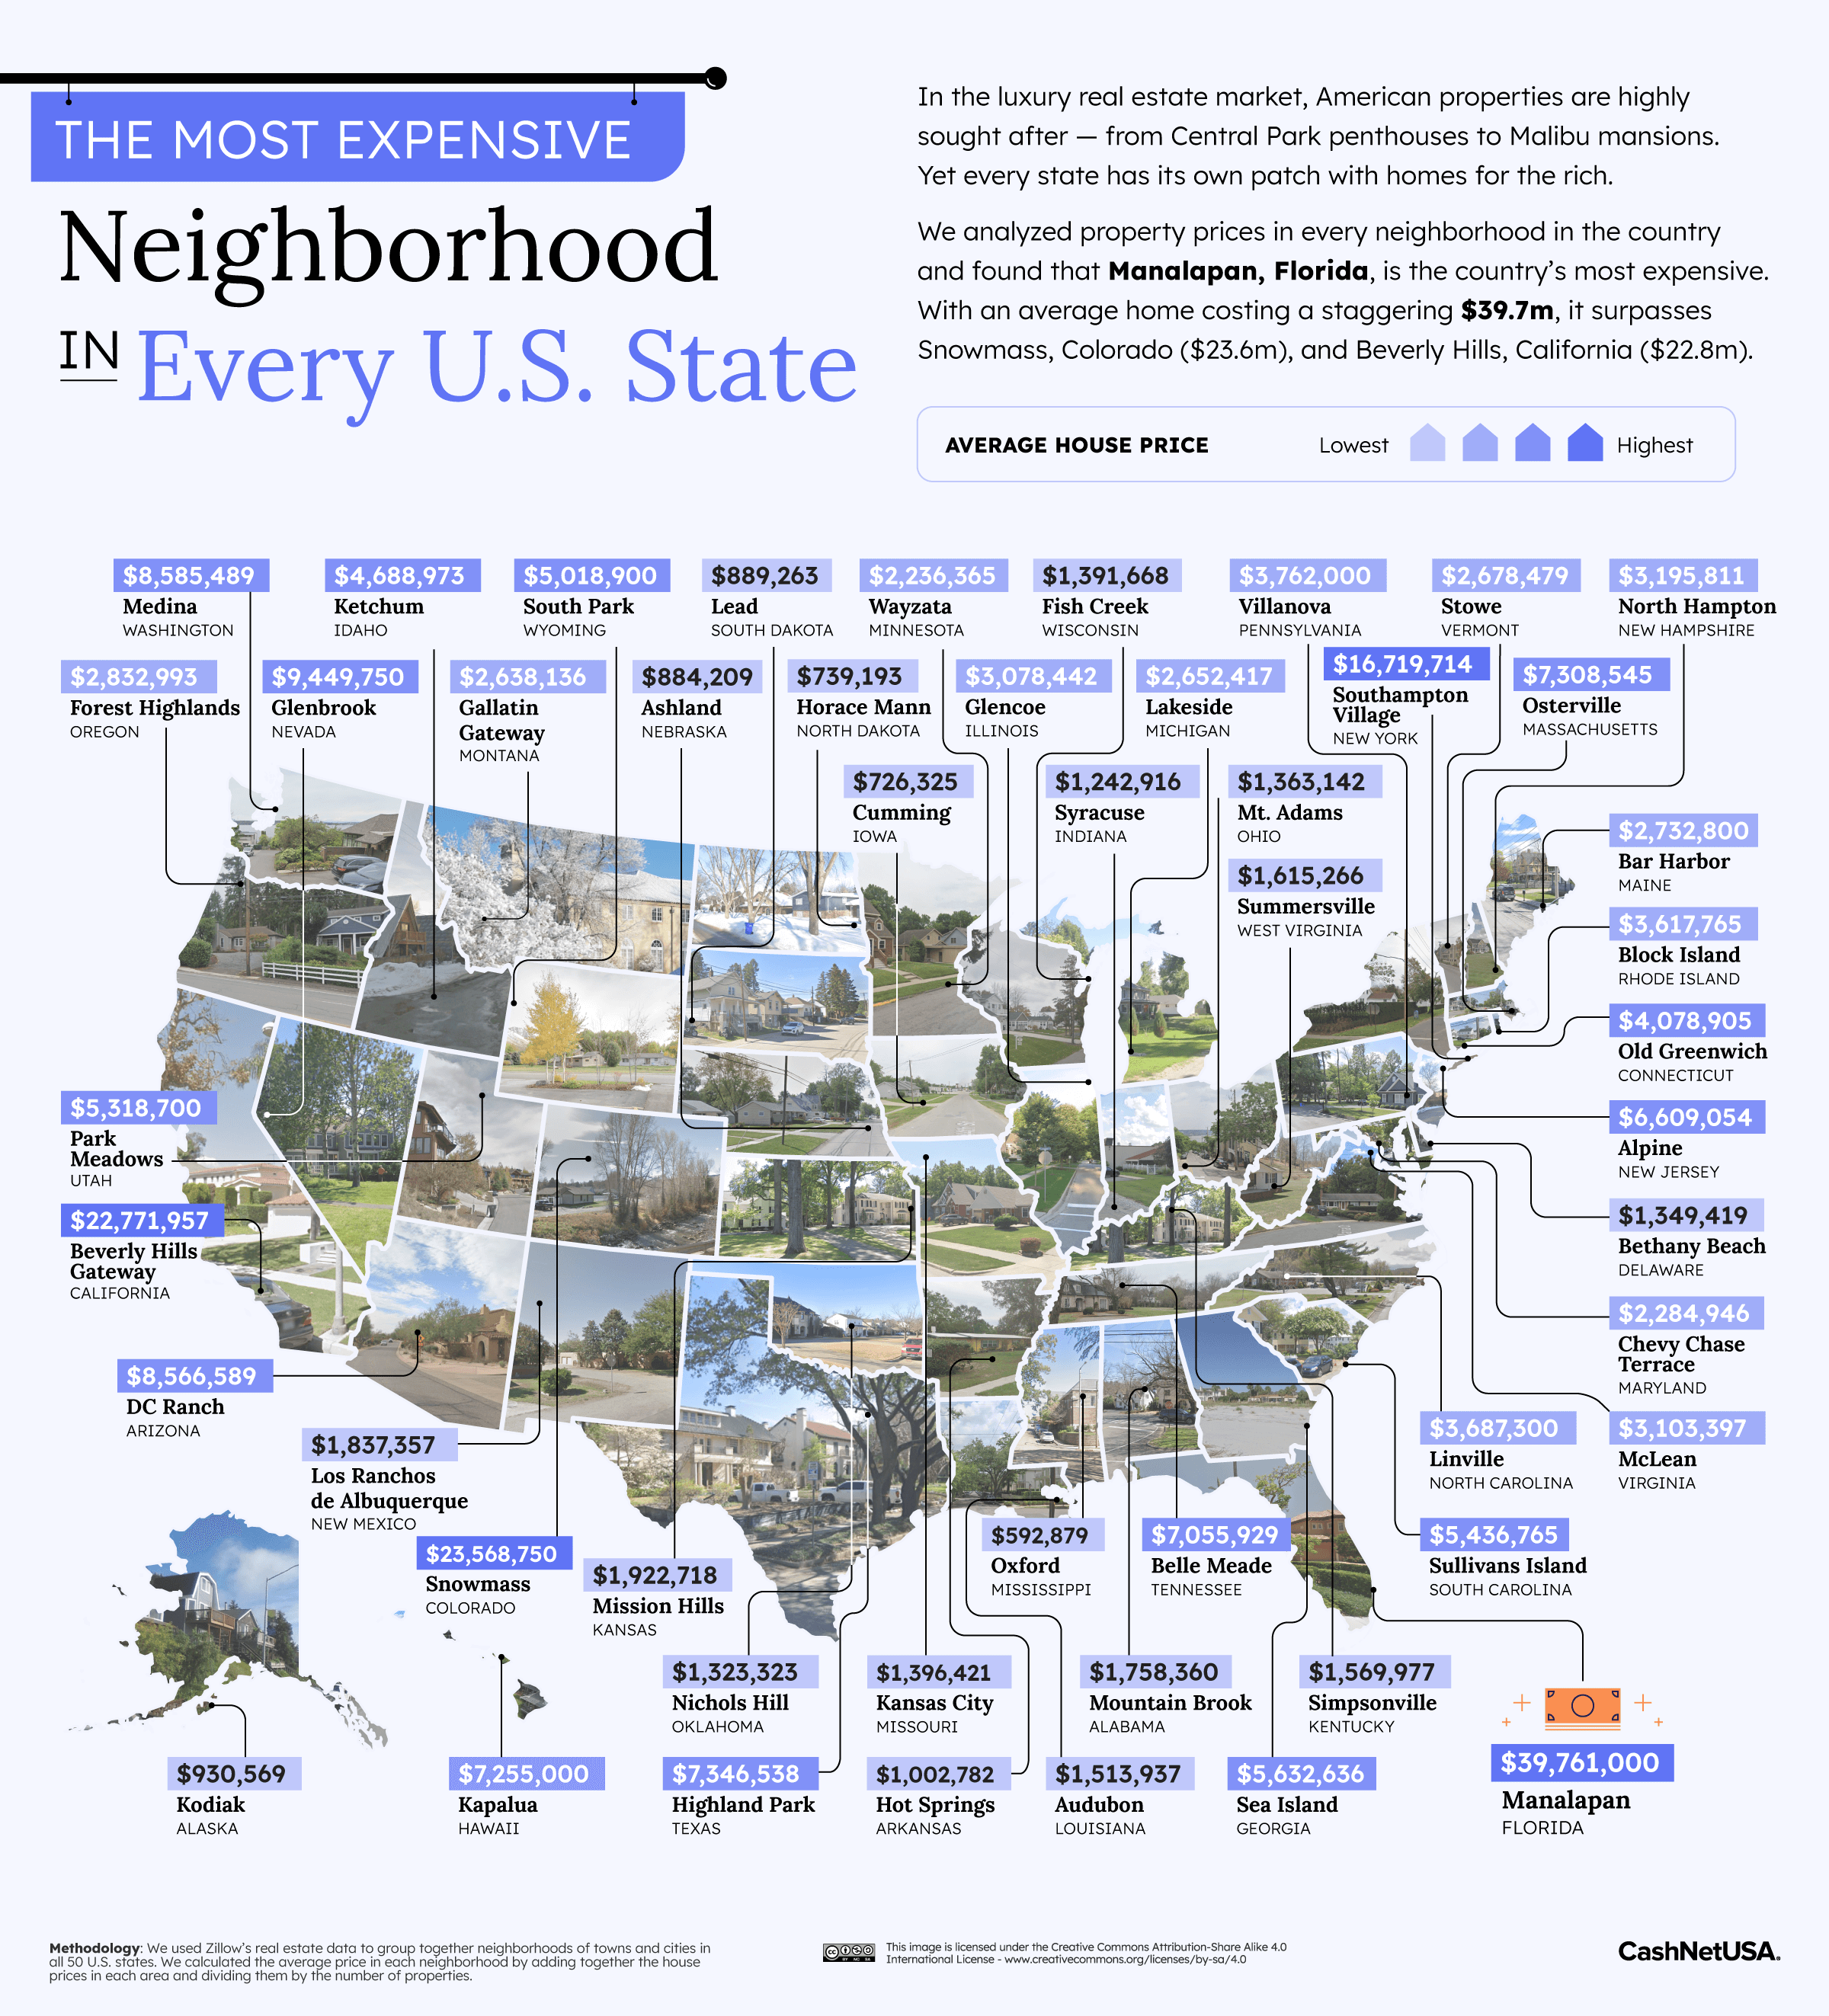 Map showing the most expensive neighborhoods in the U.S.